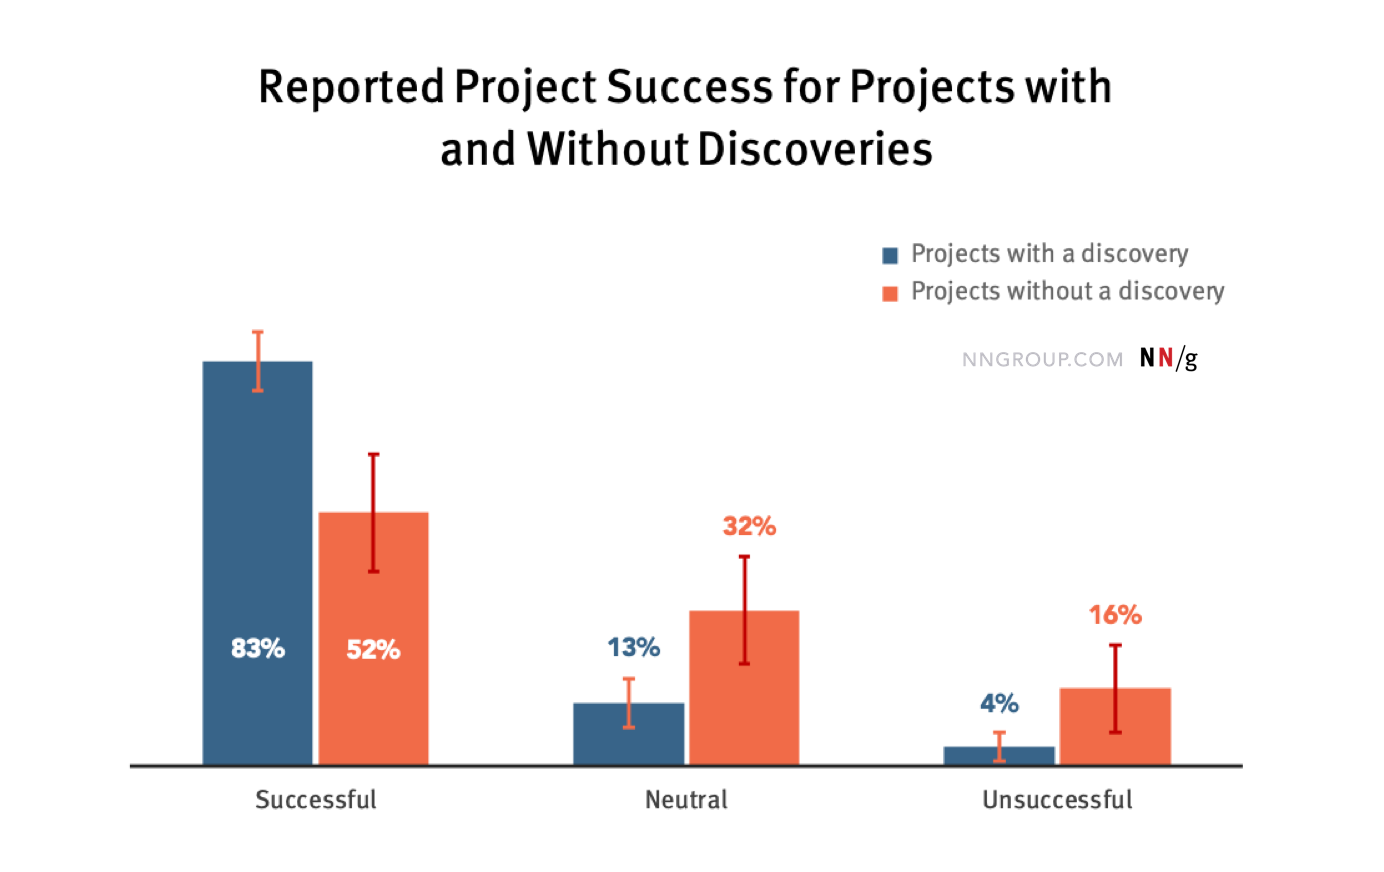 A bar chart shows the percentage of respondents who reported their last project to be successful. Of those projects that had a discovery, 83% were reported to have been successful, compared to 52% of projects that did not have a discovery. Only 4% of projects with a discovery were unsuccessful, compared to 16% of projects that did not have a discovery.